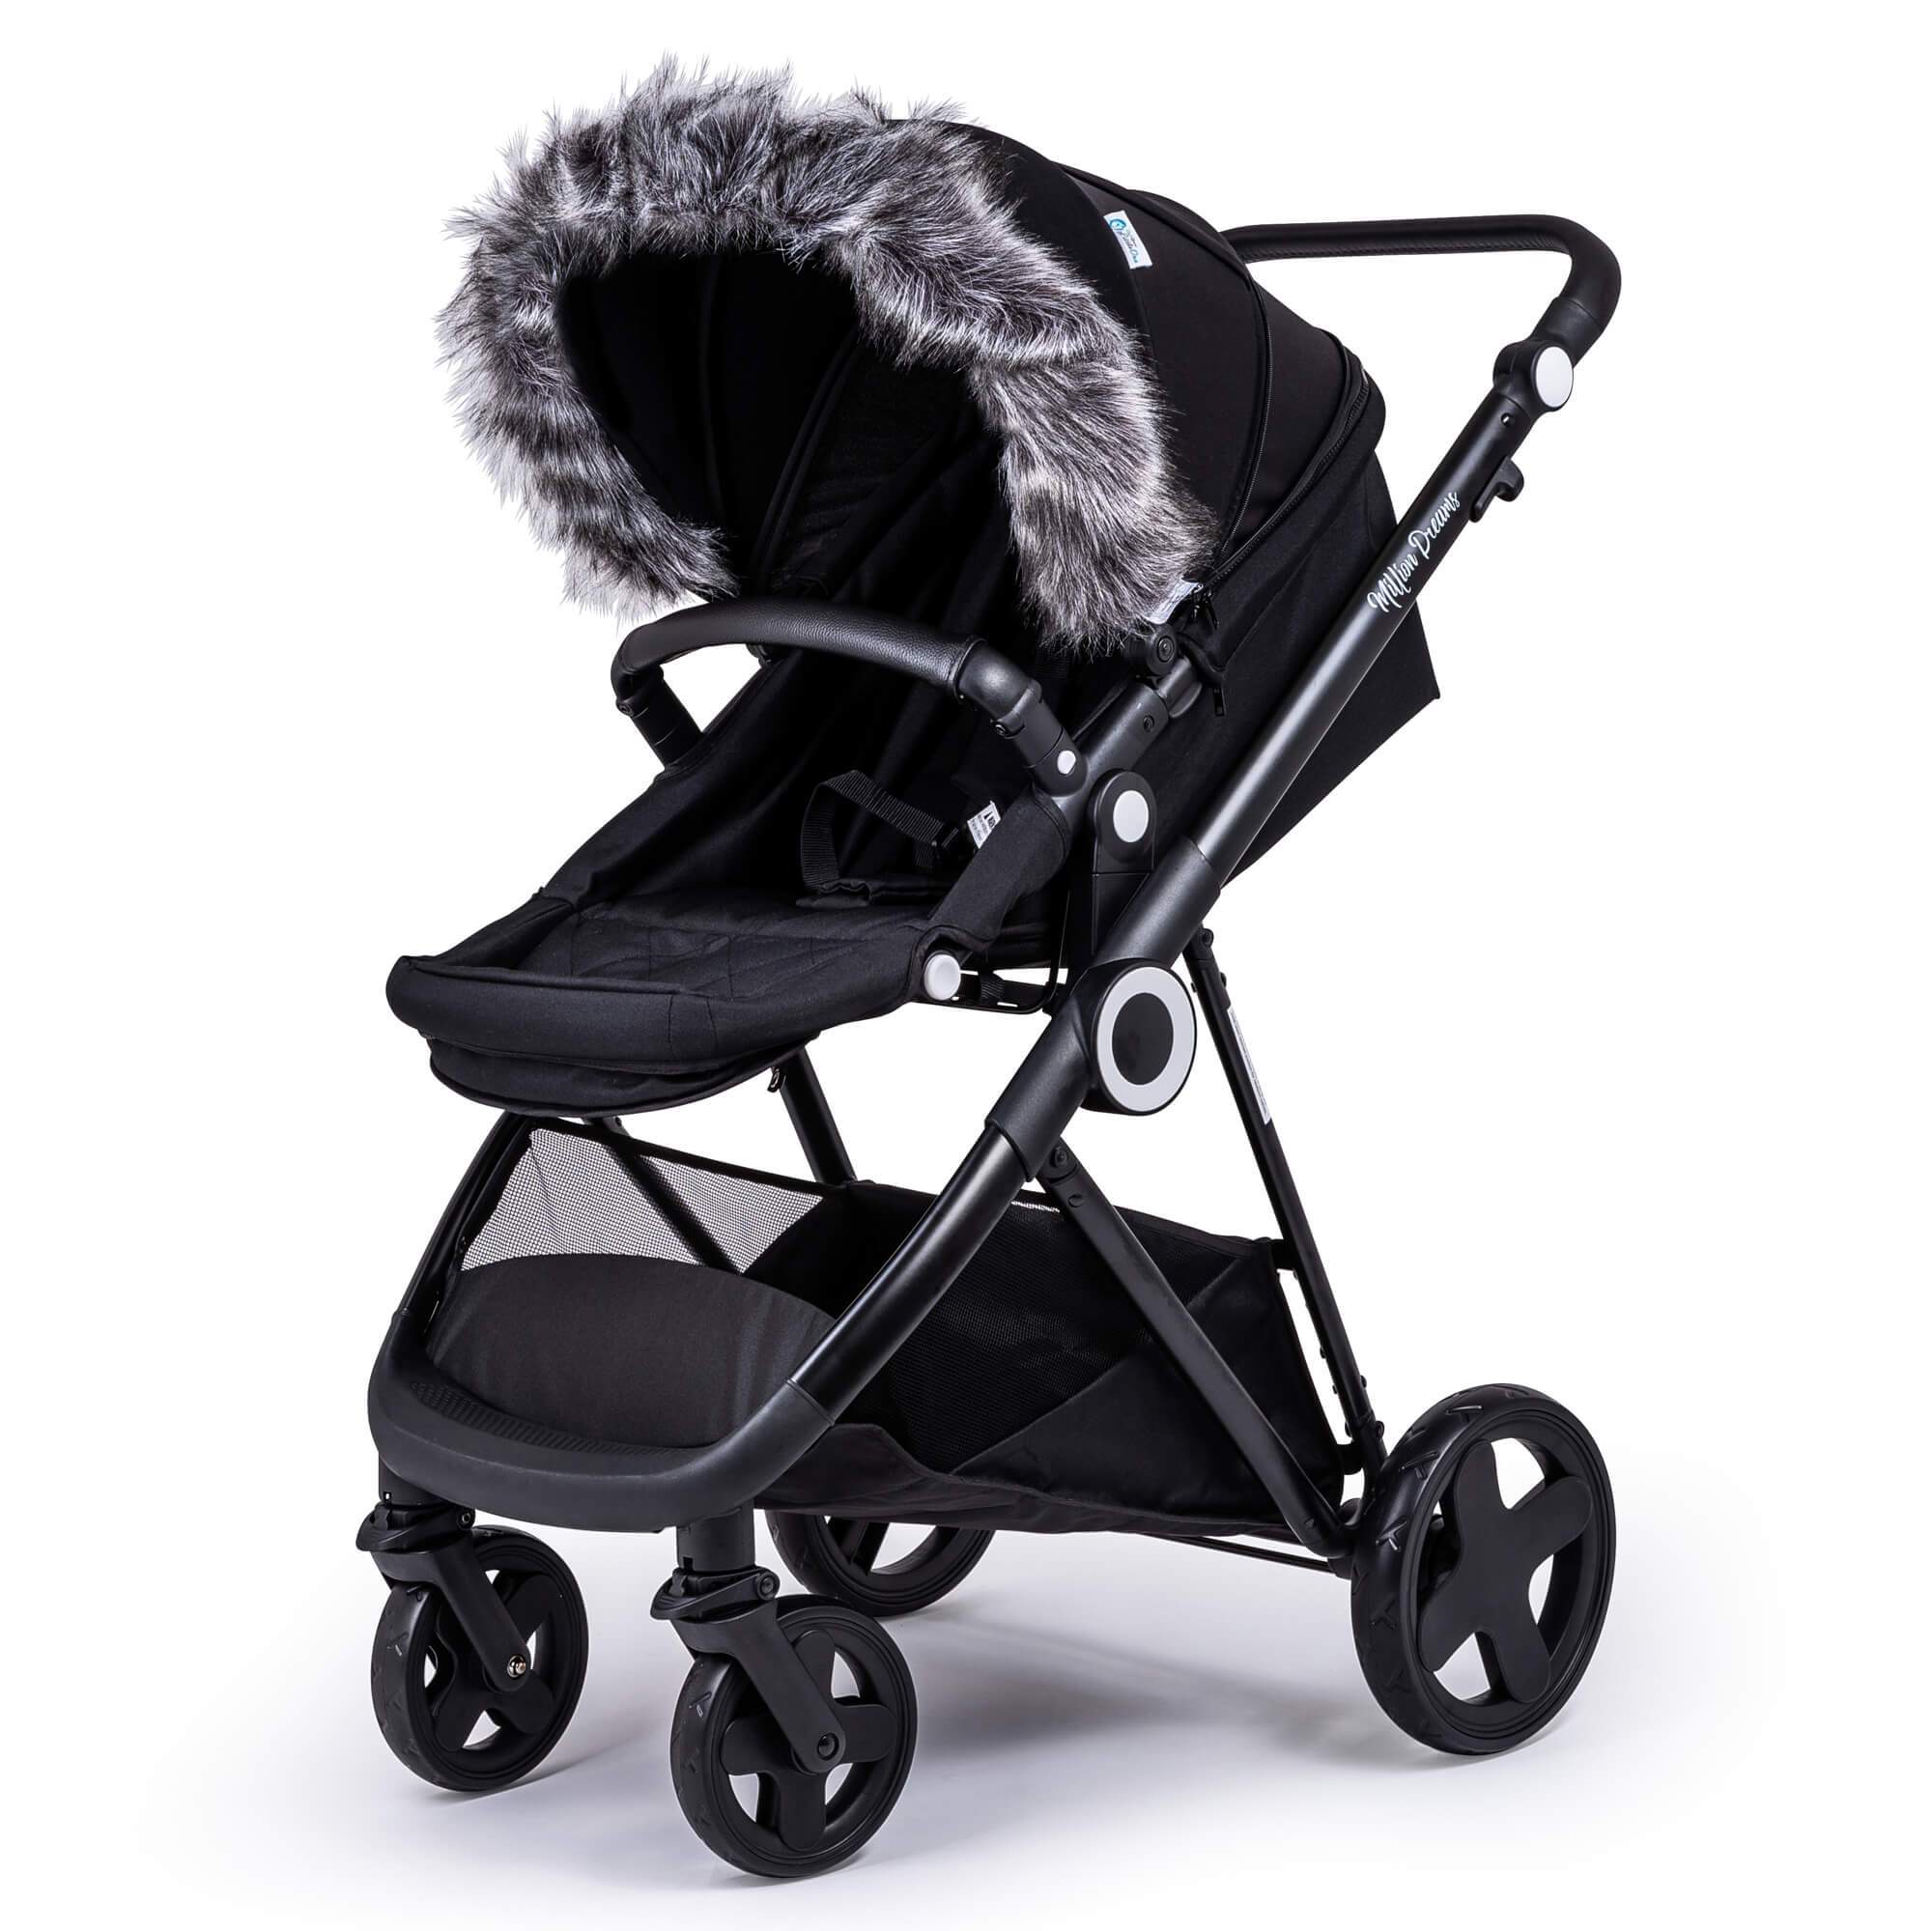 Pram Fur Hood Trim Attachment for Pushchair Compatible with Teutonia - Dark Grey / Fits All Models | For Your Little One